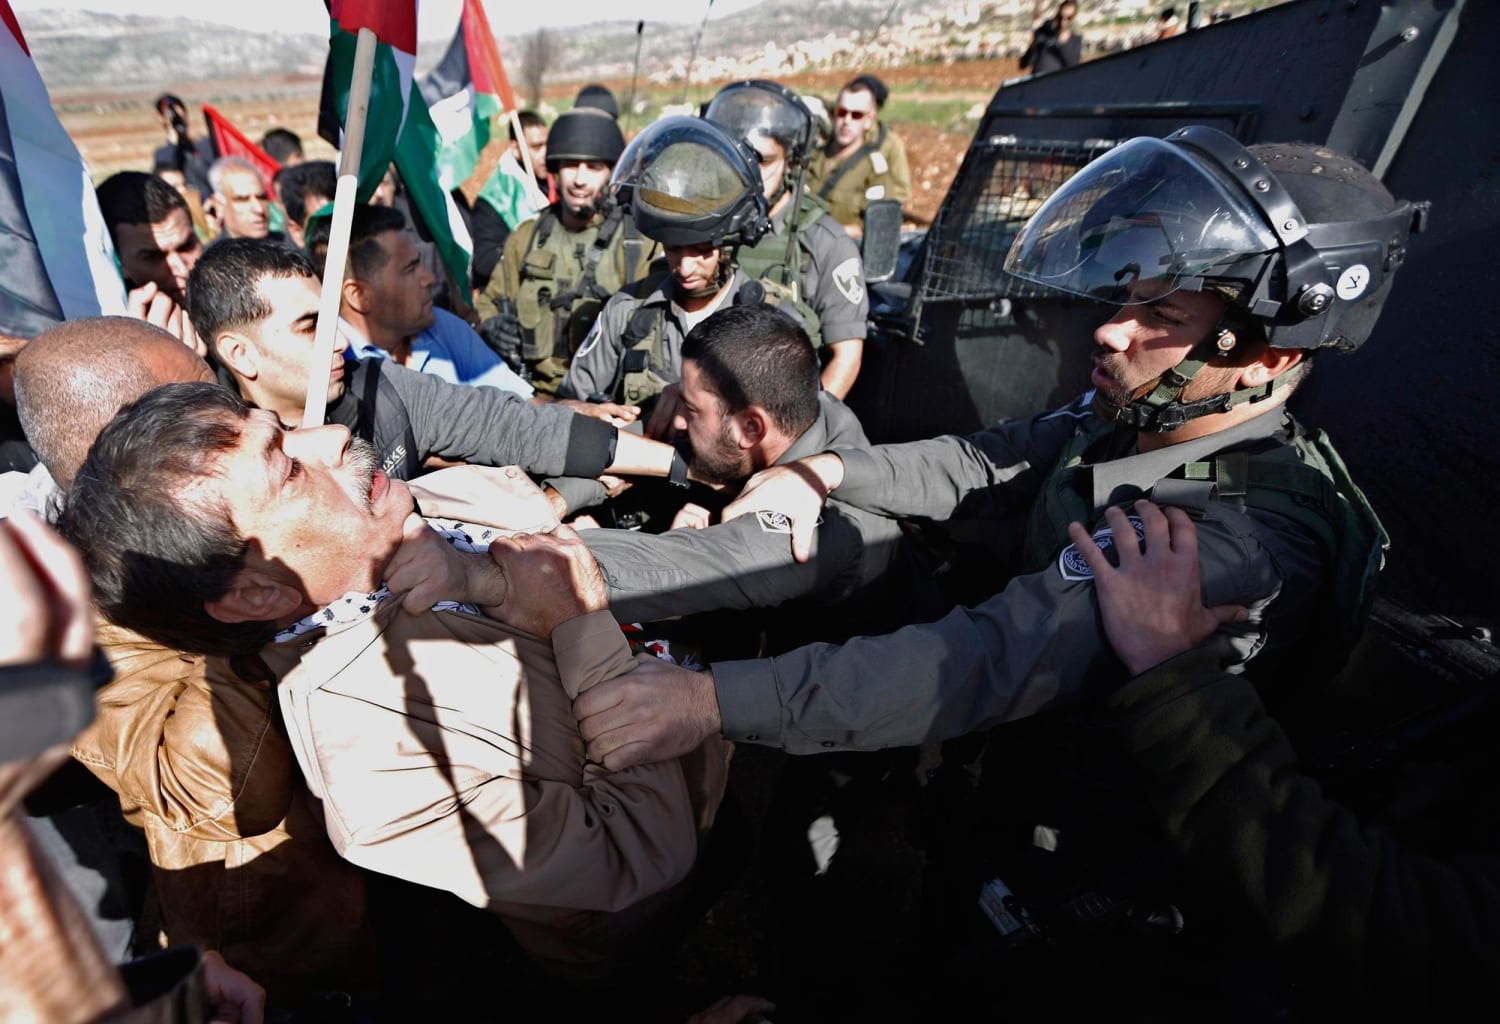 Image: Palestinian minister Ziad Abu Ein scuffles with an Israeli border policeman near the West Bank city of Ramallah